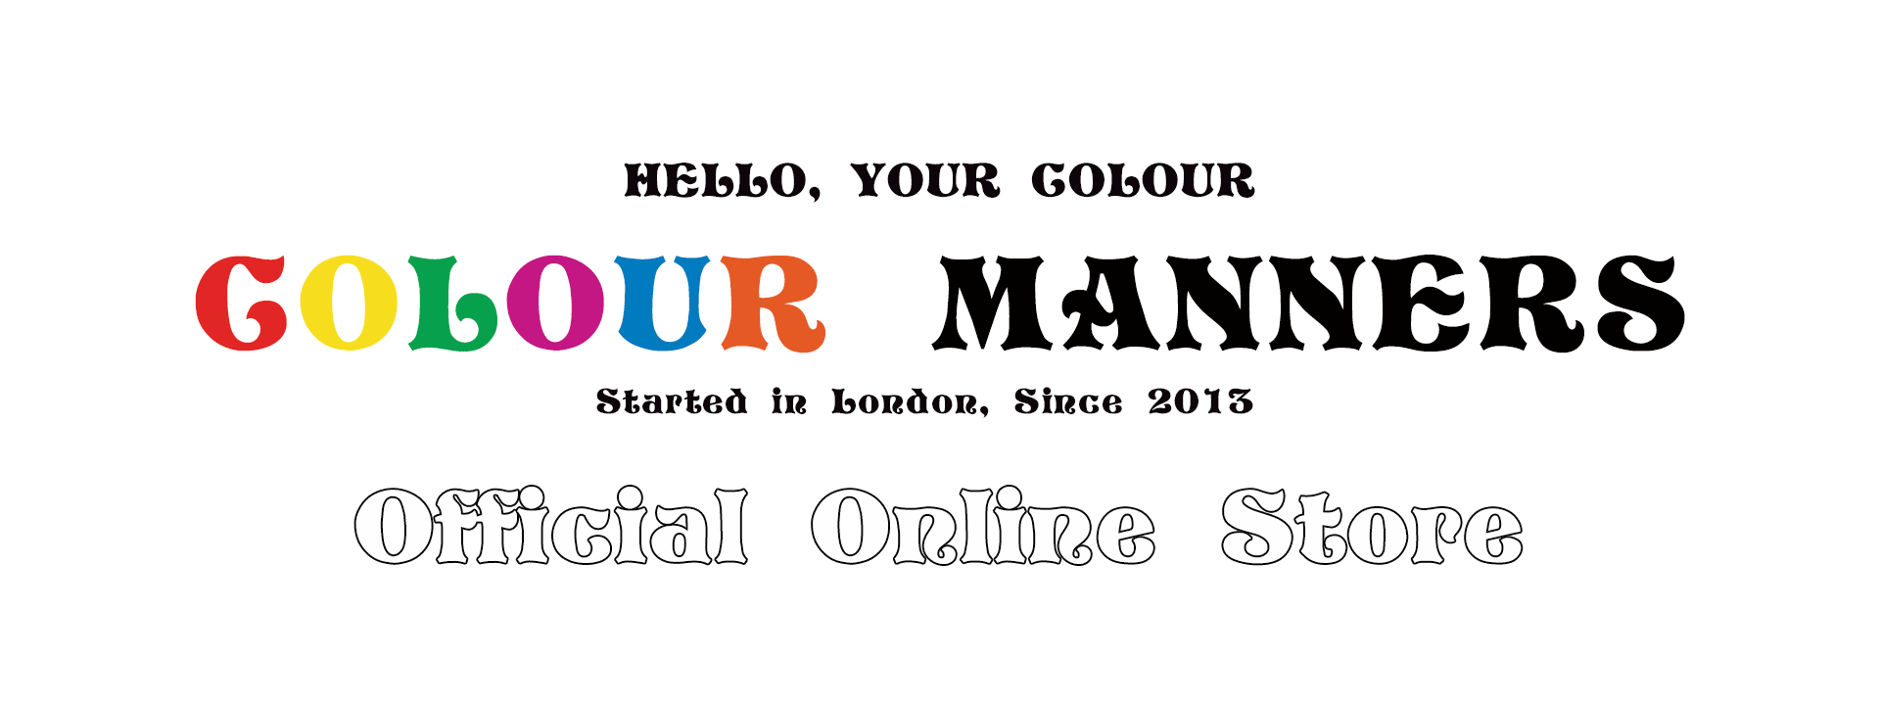 COLOUR MANNERS Official Online Store